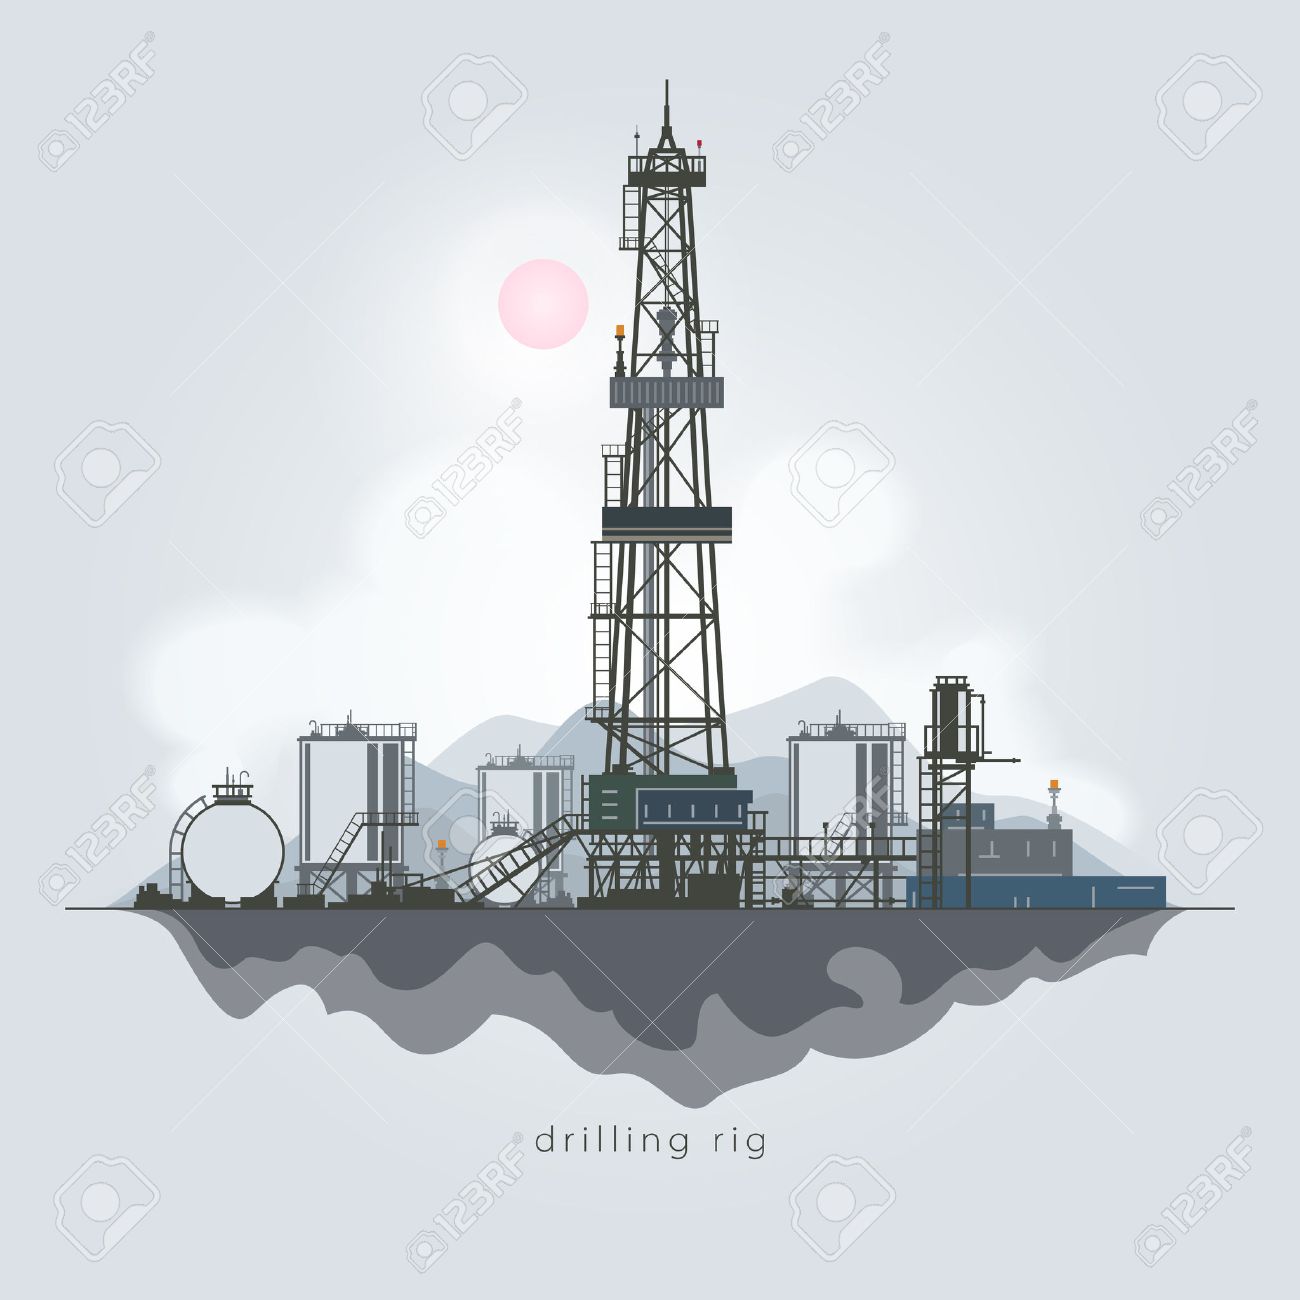 Drilling Rig In The Background Of Mountains Oil Rig Oil Well